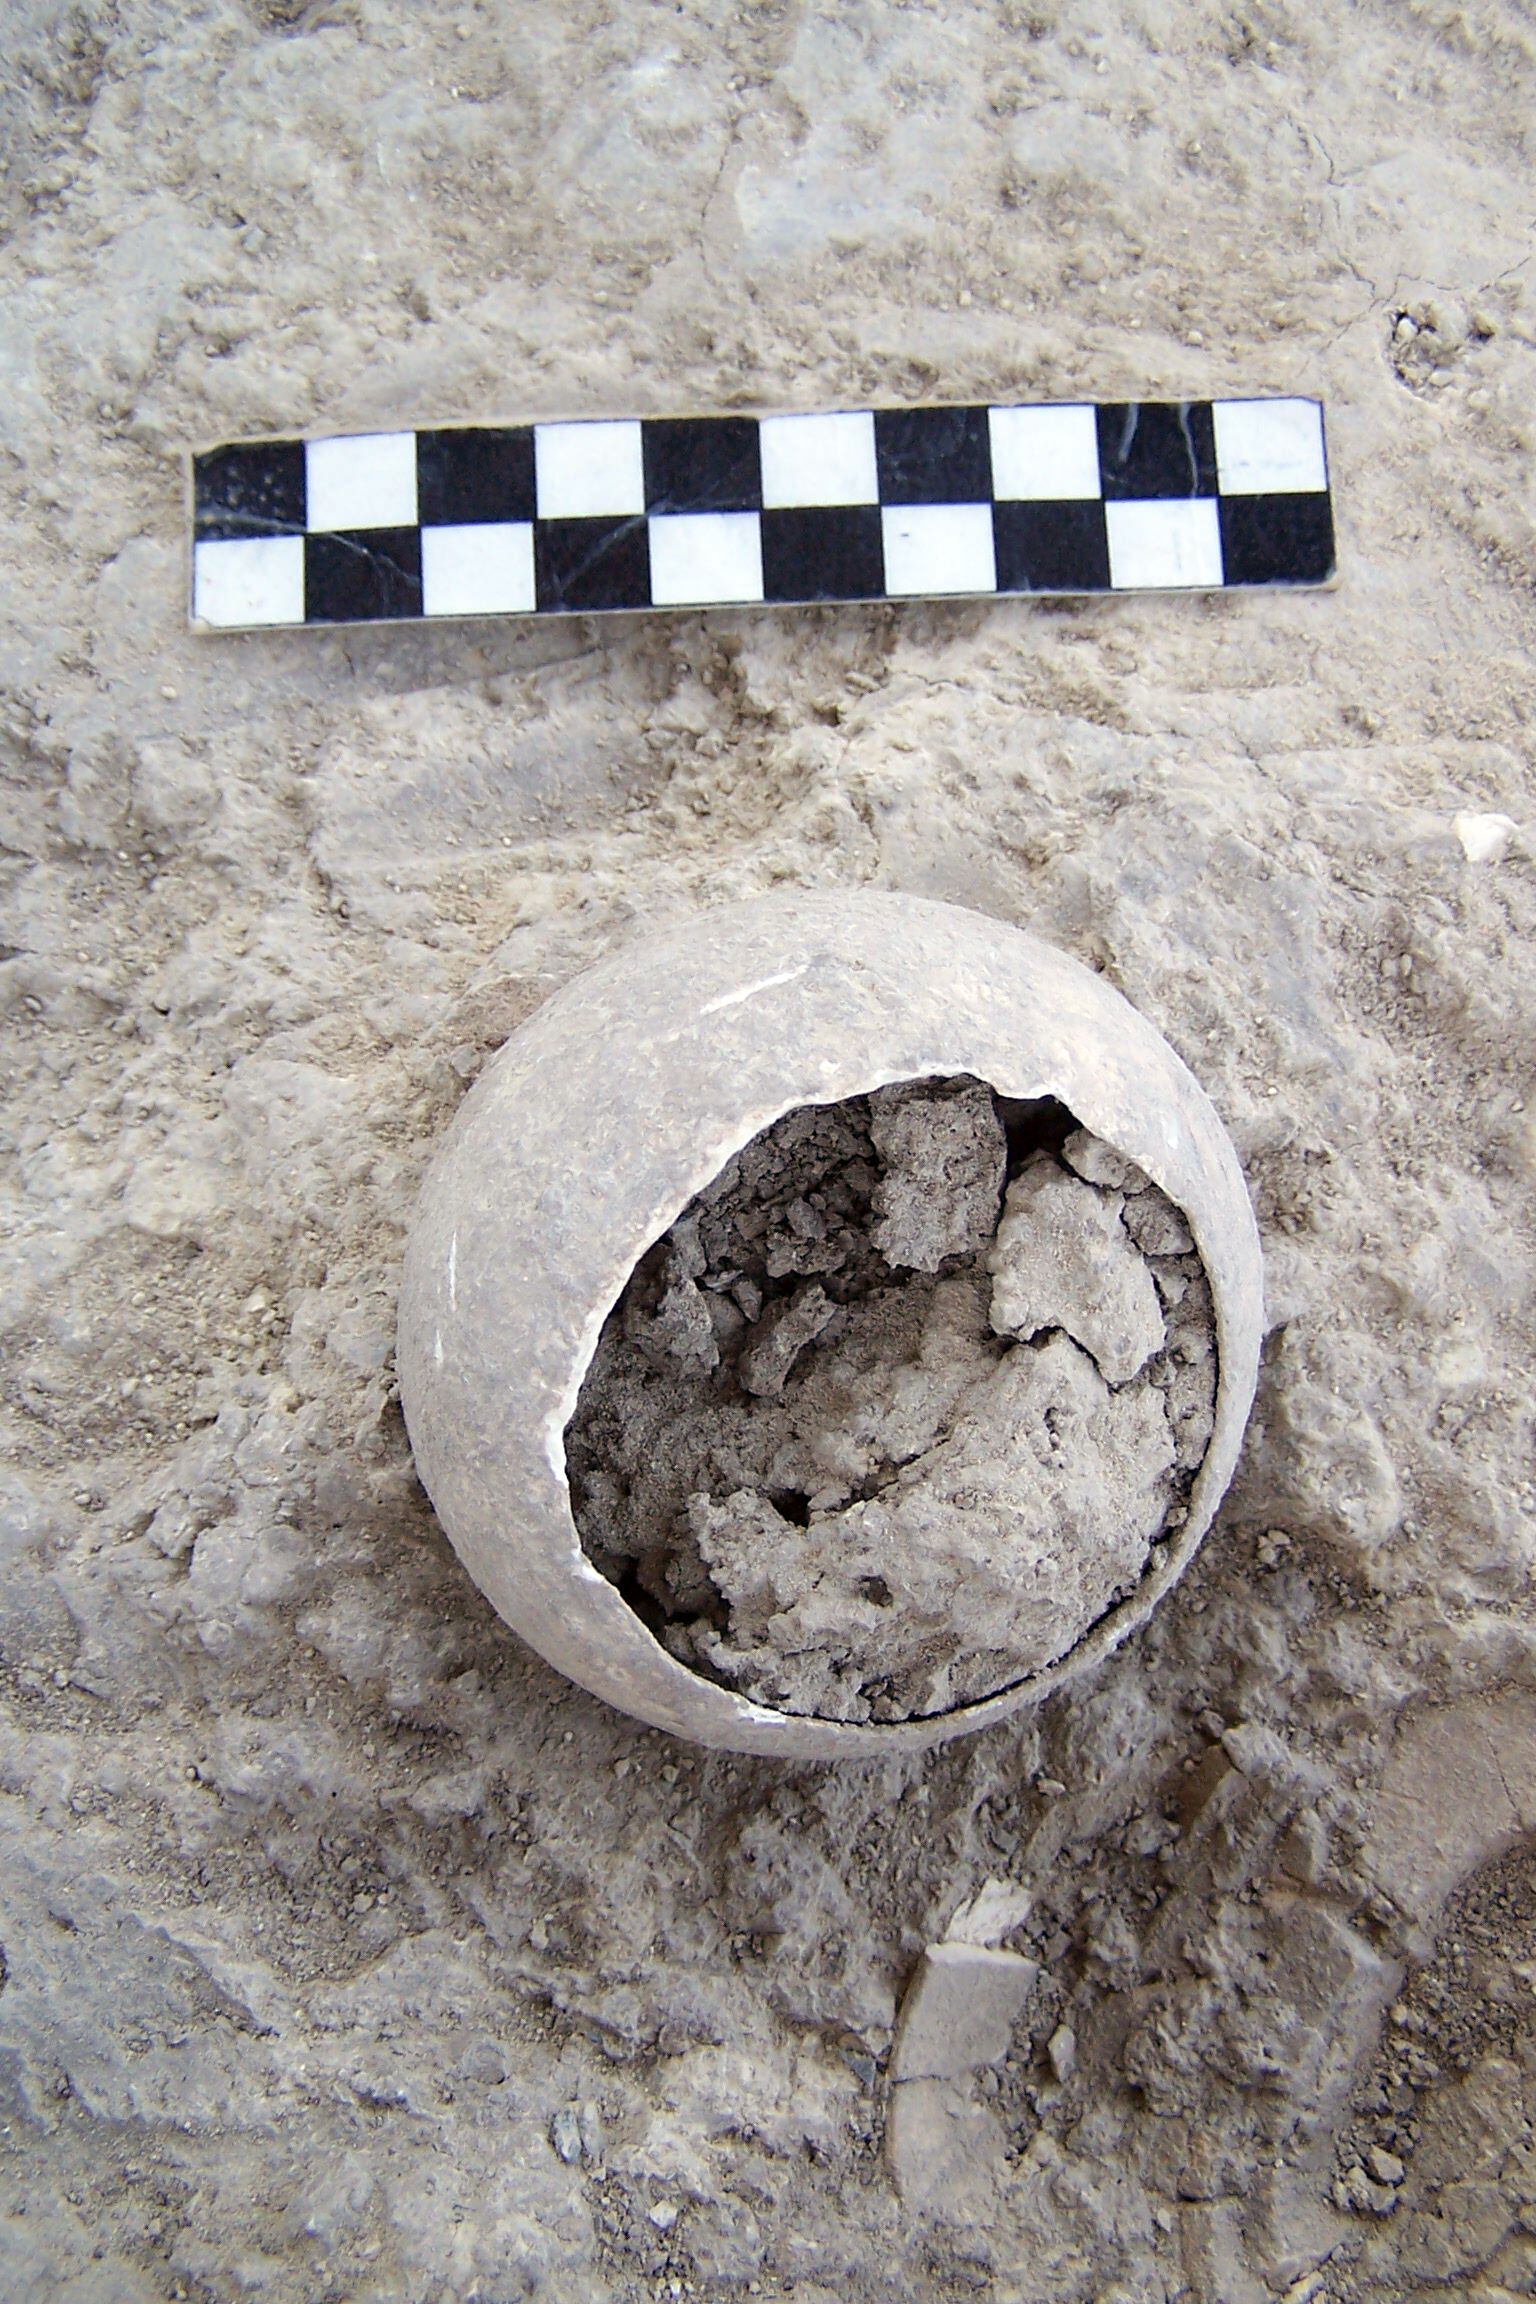 Ostrich egg found at the Valencina site. 